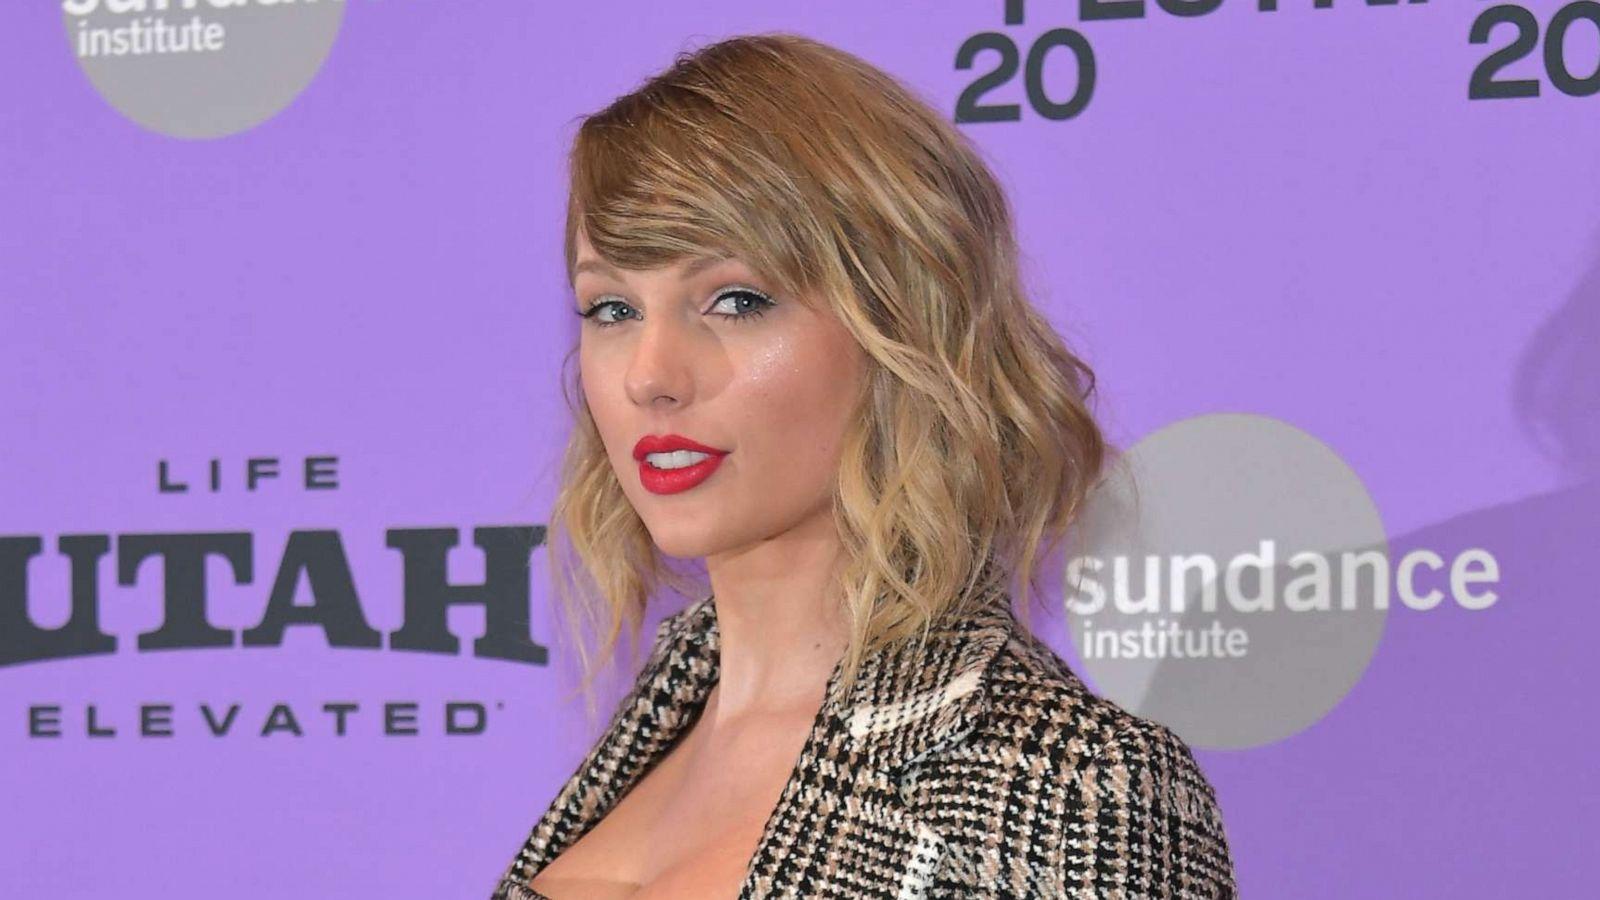 Taylor Swift opens up about past struggle with eating